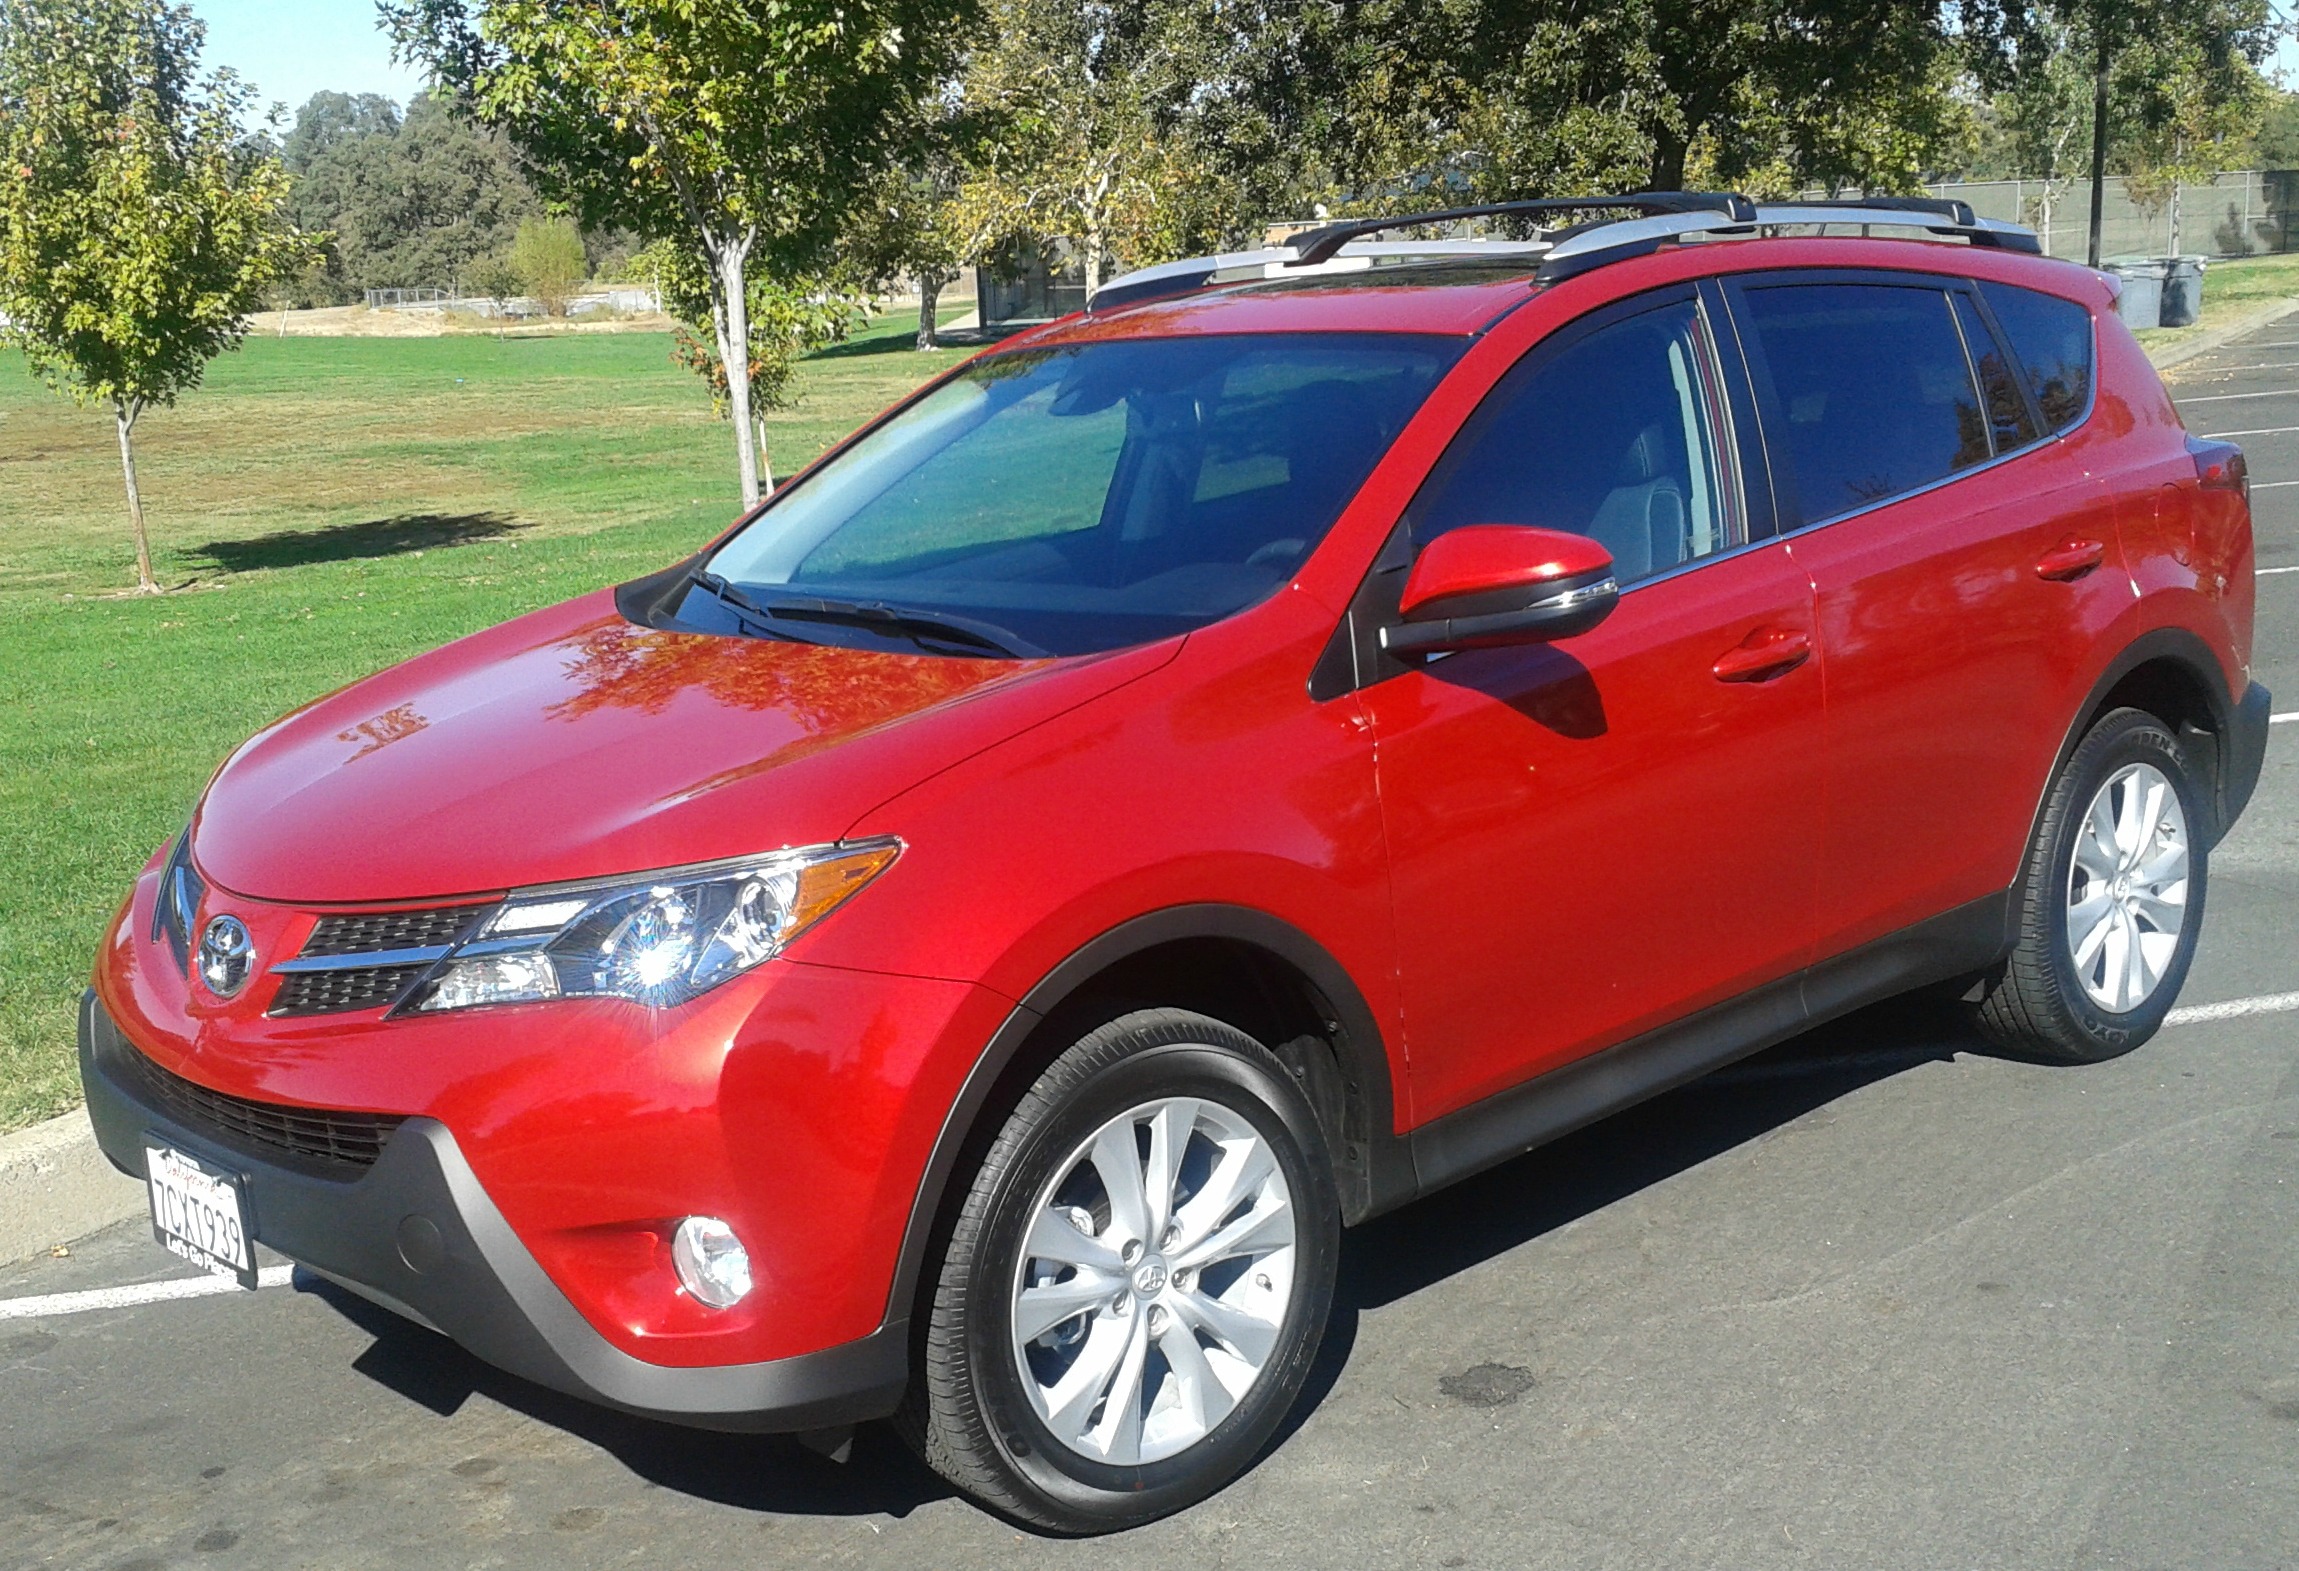 Toyota RAV4 review: Still reliable compact SUV